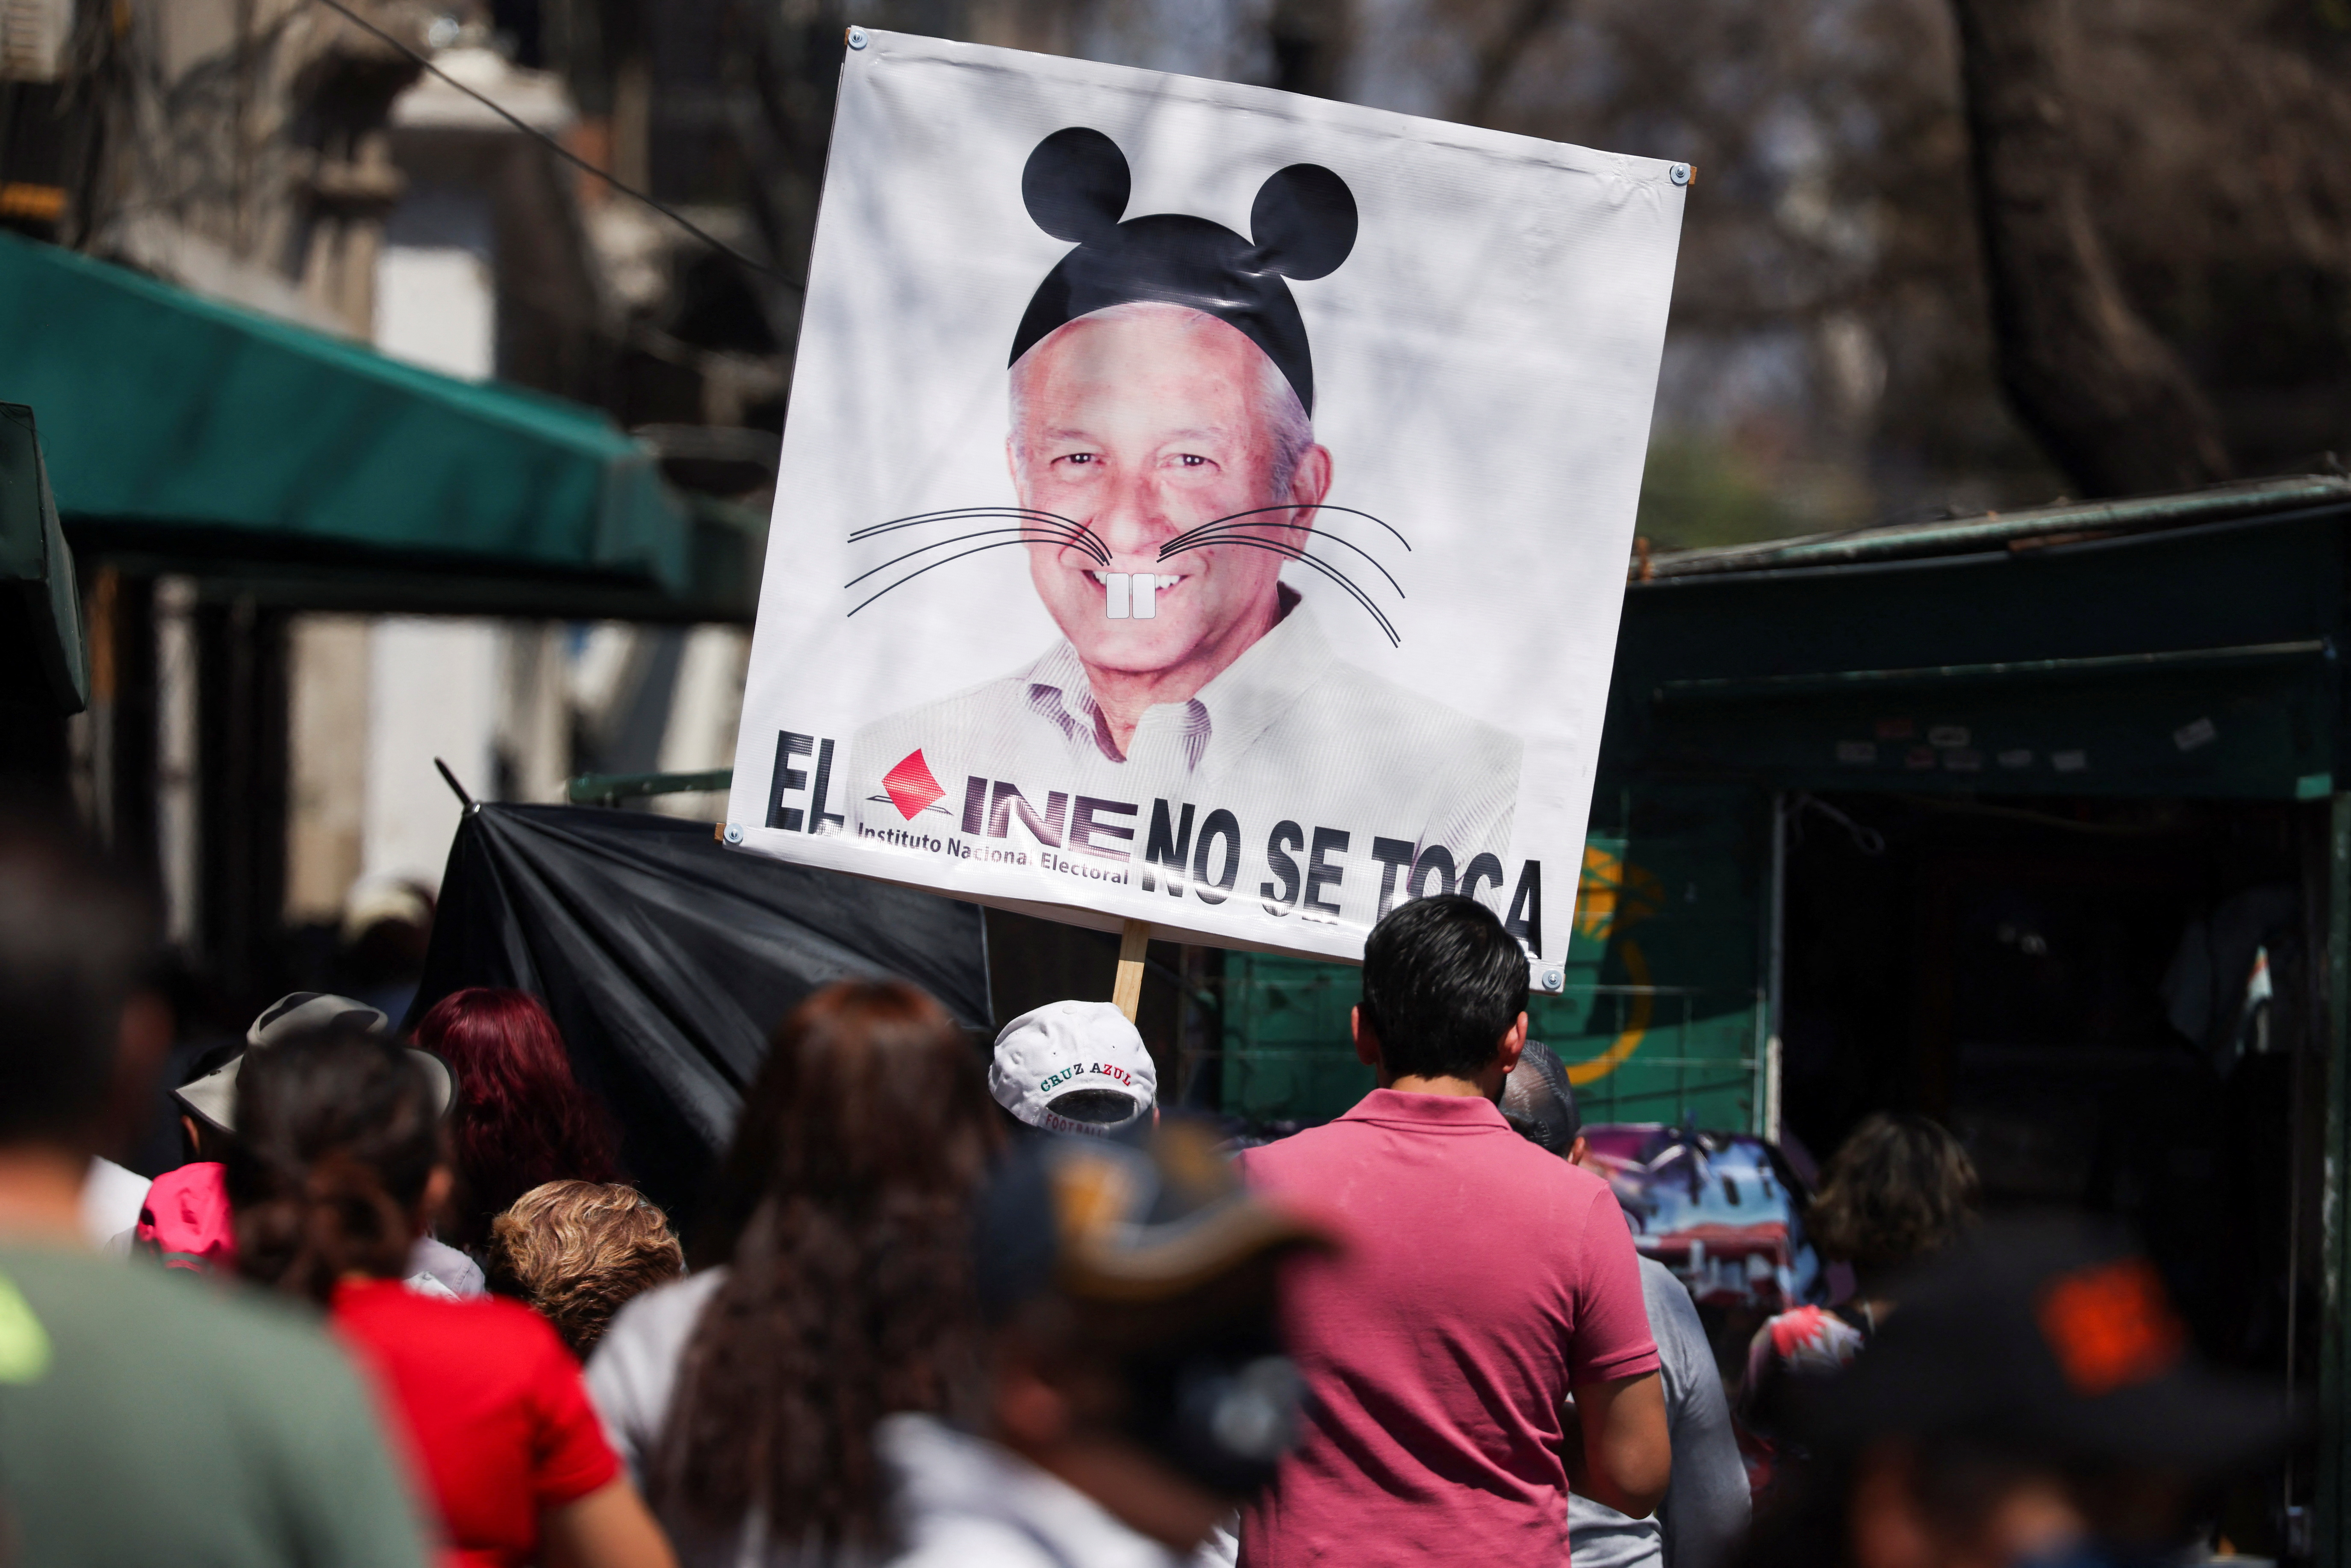 Demonstrators attend a protest in support of the National Electoral Institute (INE) and against President Andres Manuel Lopez Obrador's plan to reform the electoral authority, in Mexico City, Mexico, February 26, 2023. REUTERS/Gustavo Graf